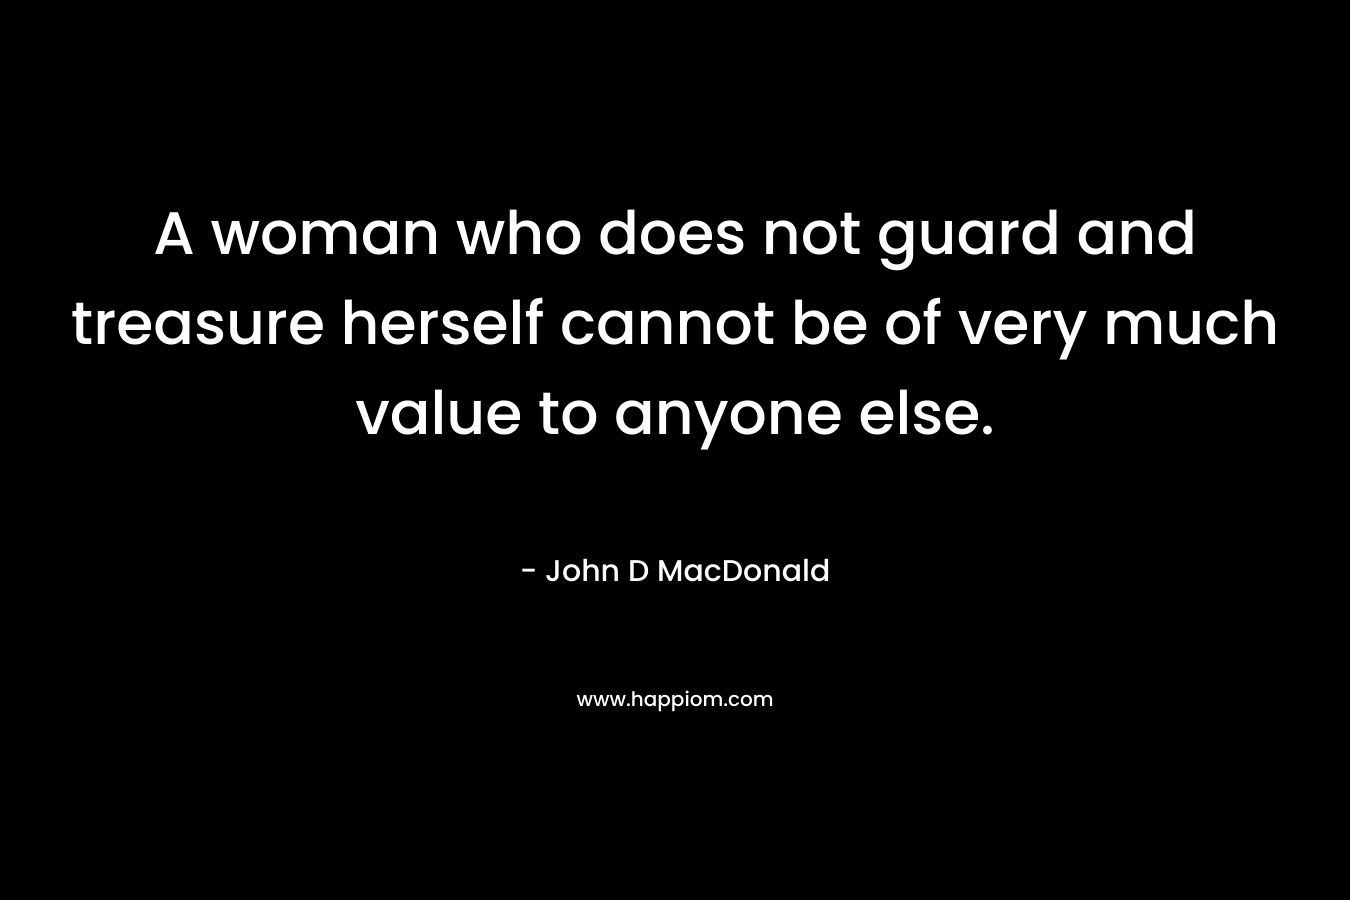 A woman who does not guard and treasure herself cannot be of very much value to anyone else.